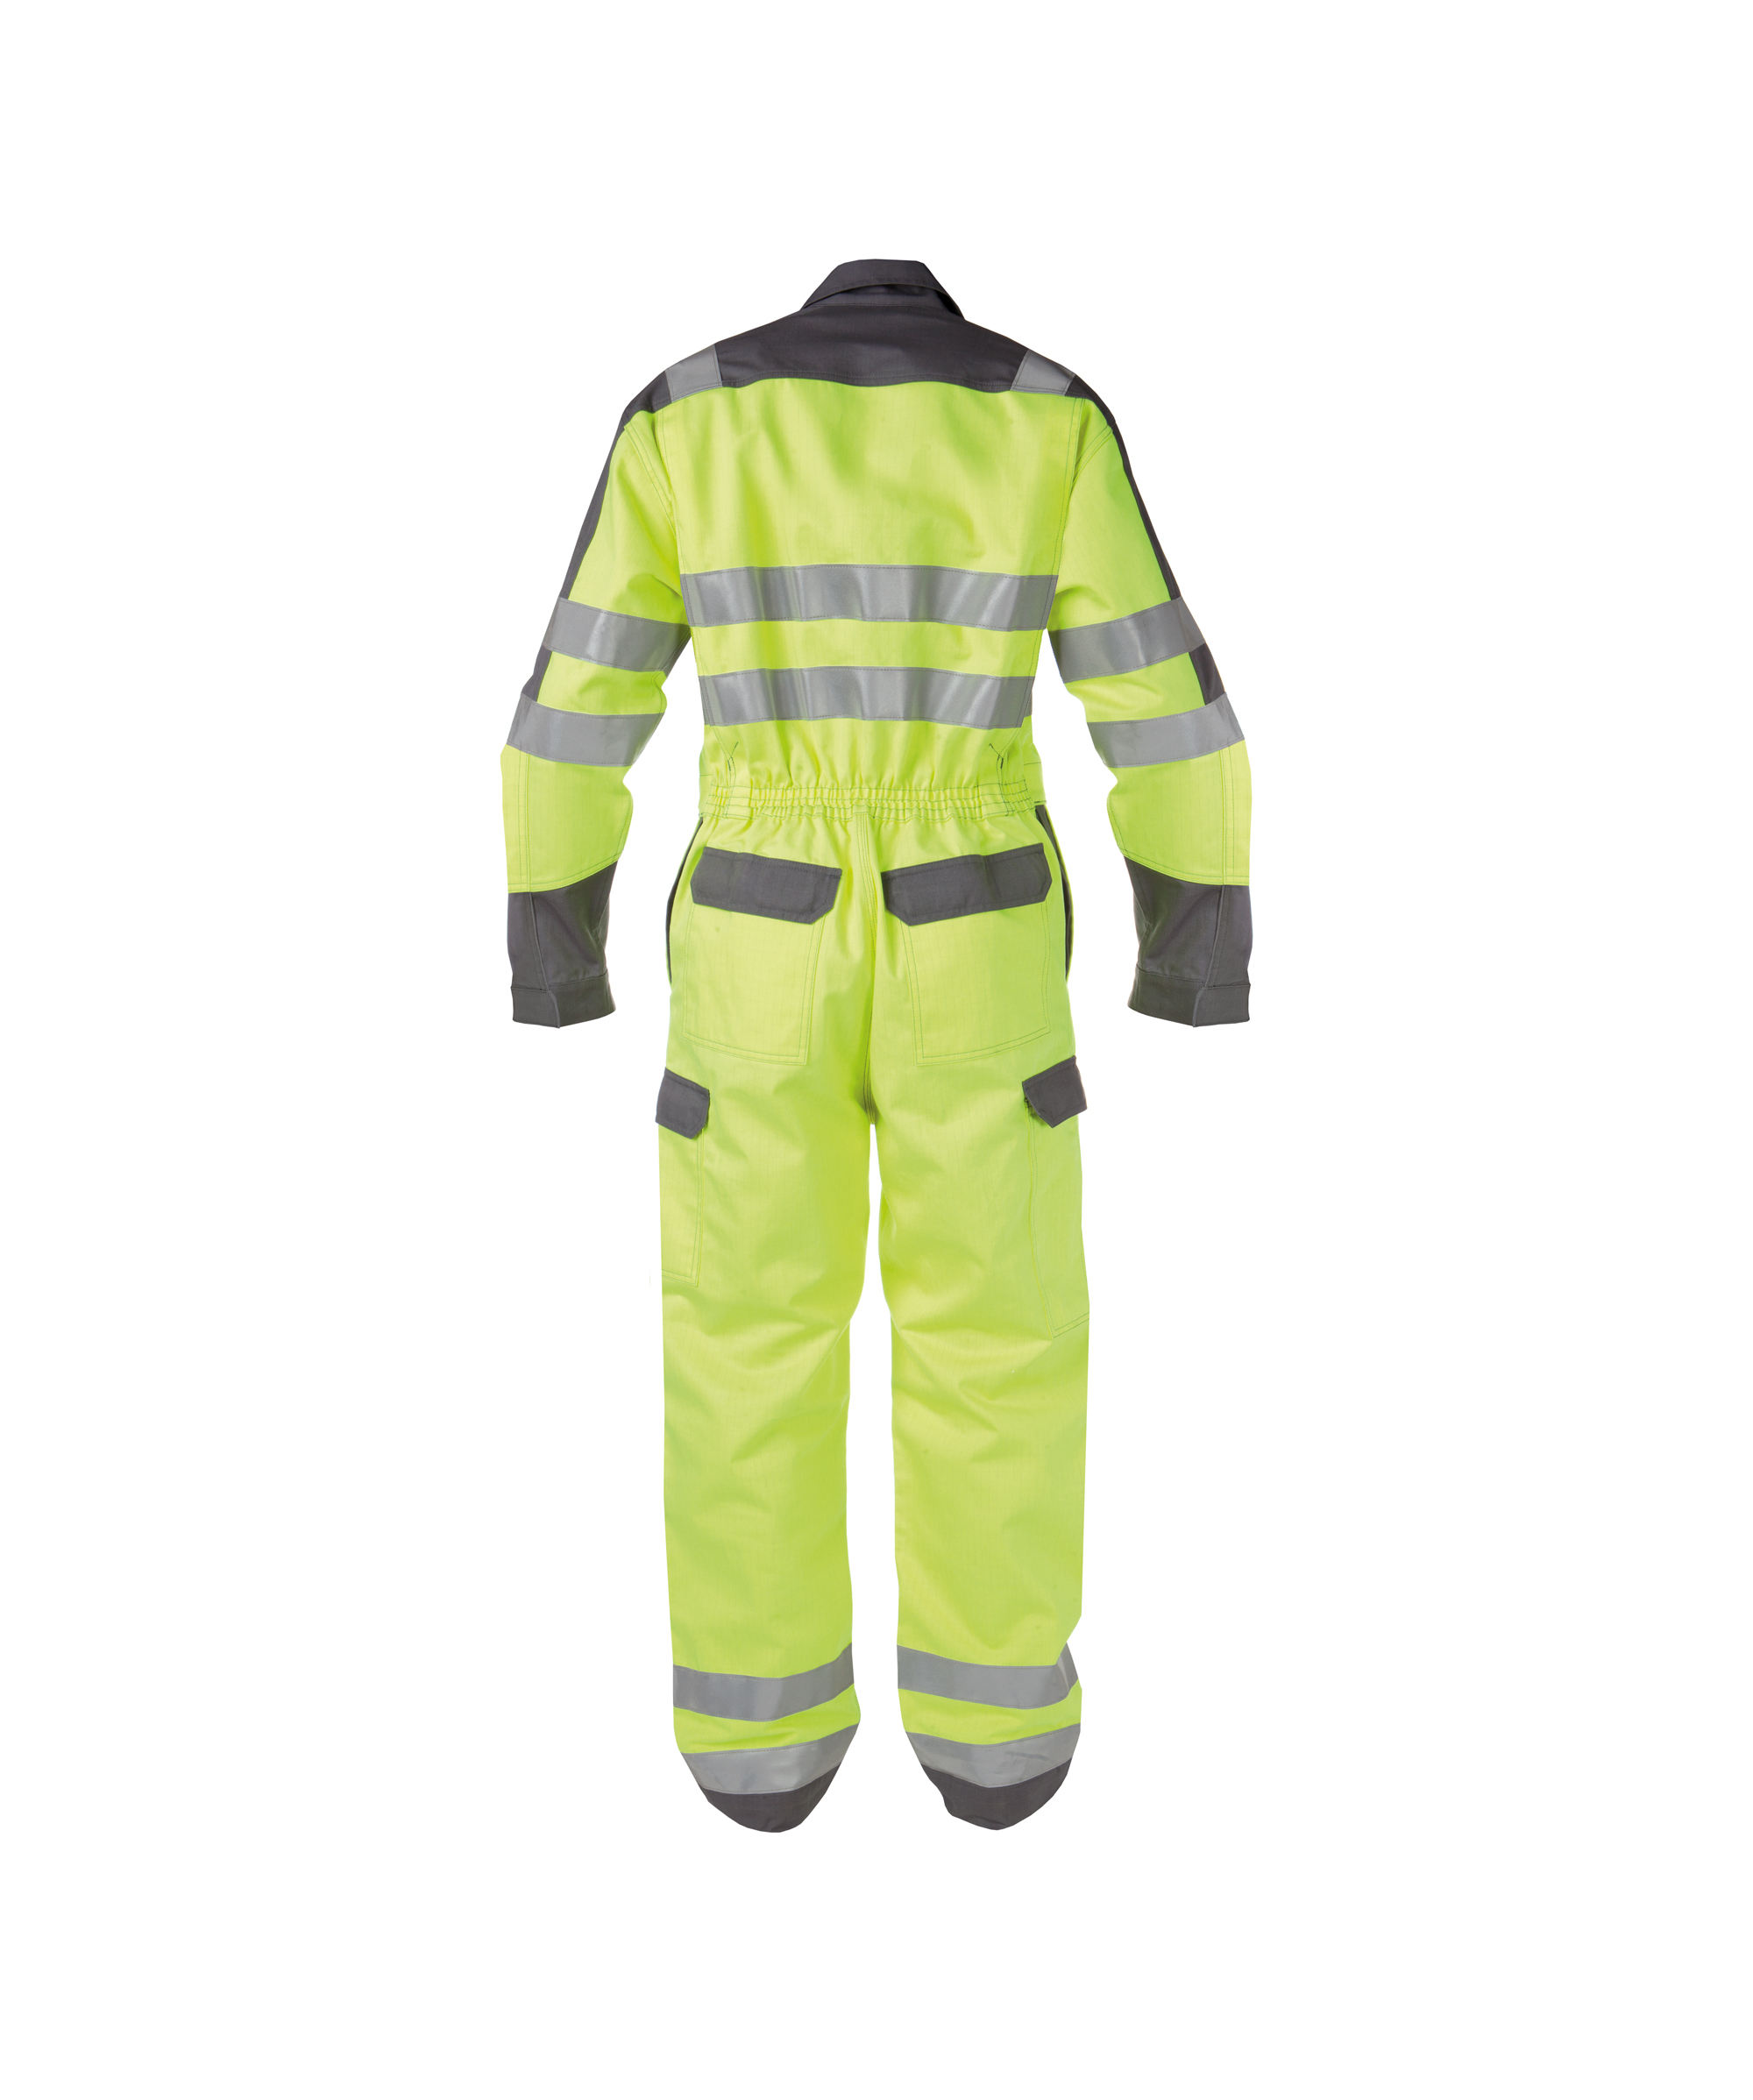 spencer_two-tone-multinorm-high-visibility-overall-with-knee-pockets_fluo-yellow-graphite-grey_back.jpg